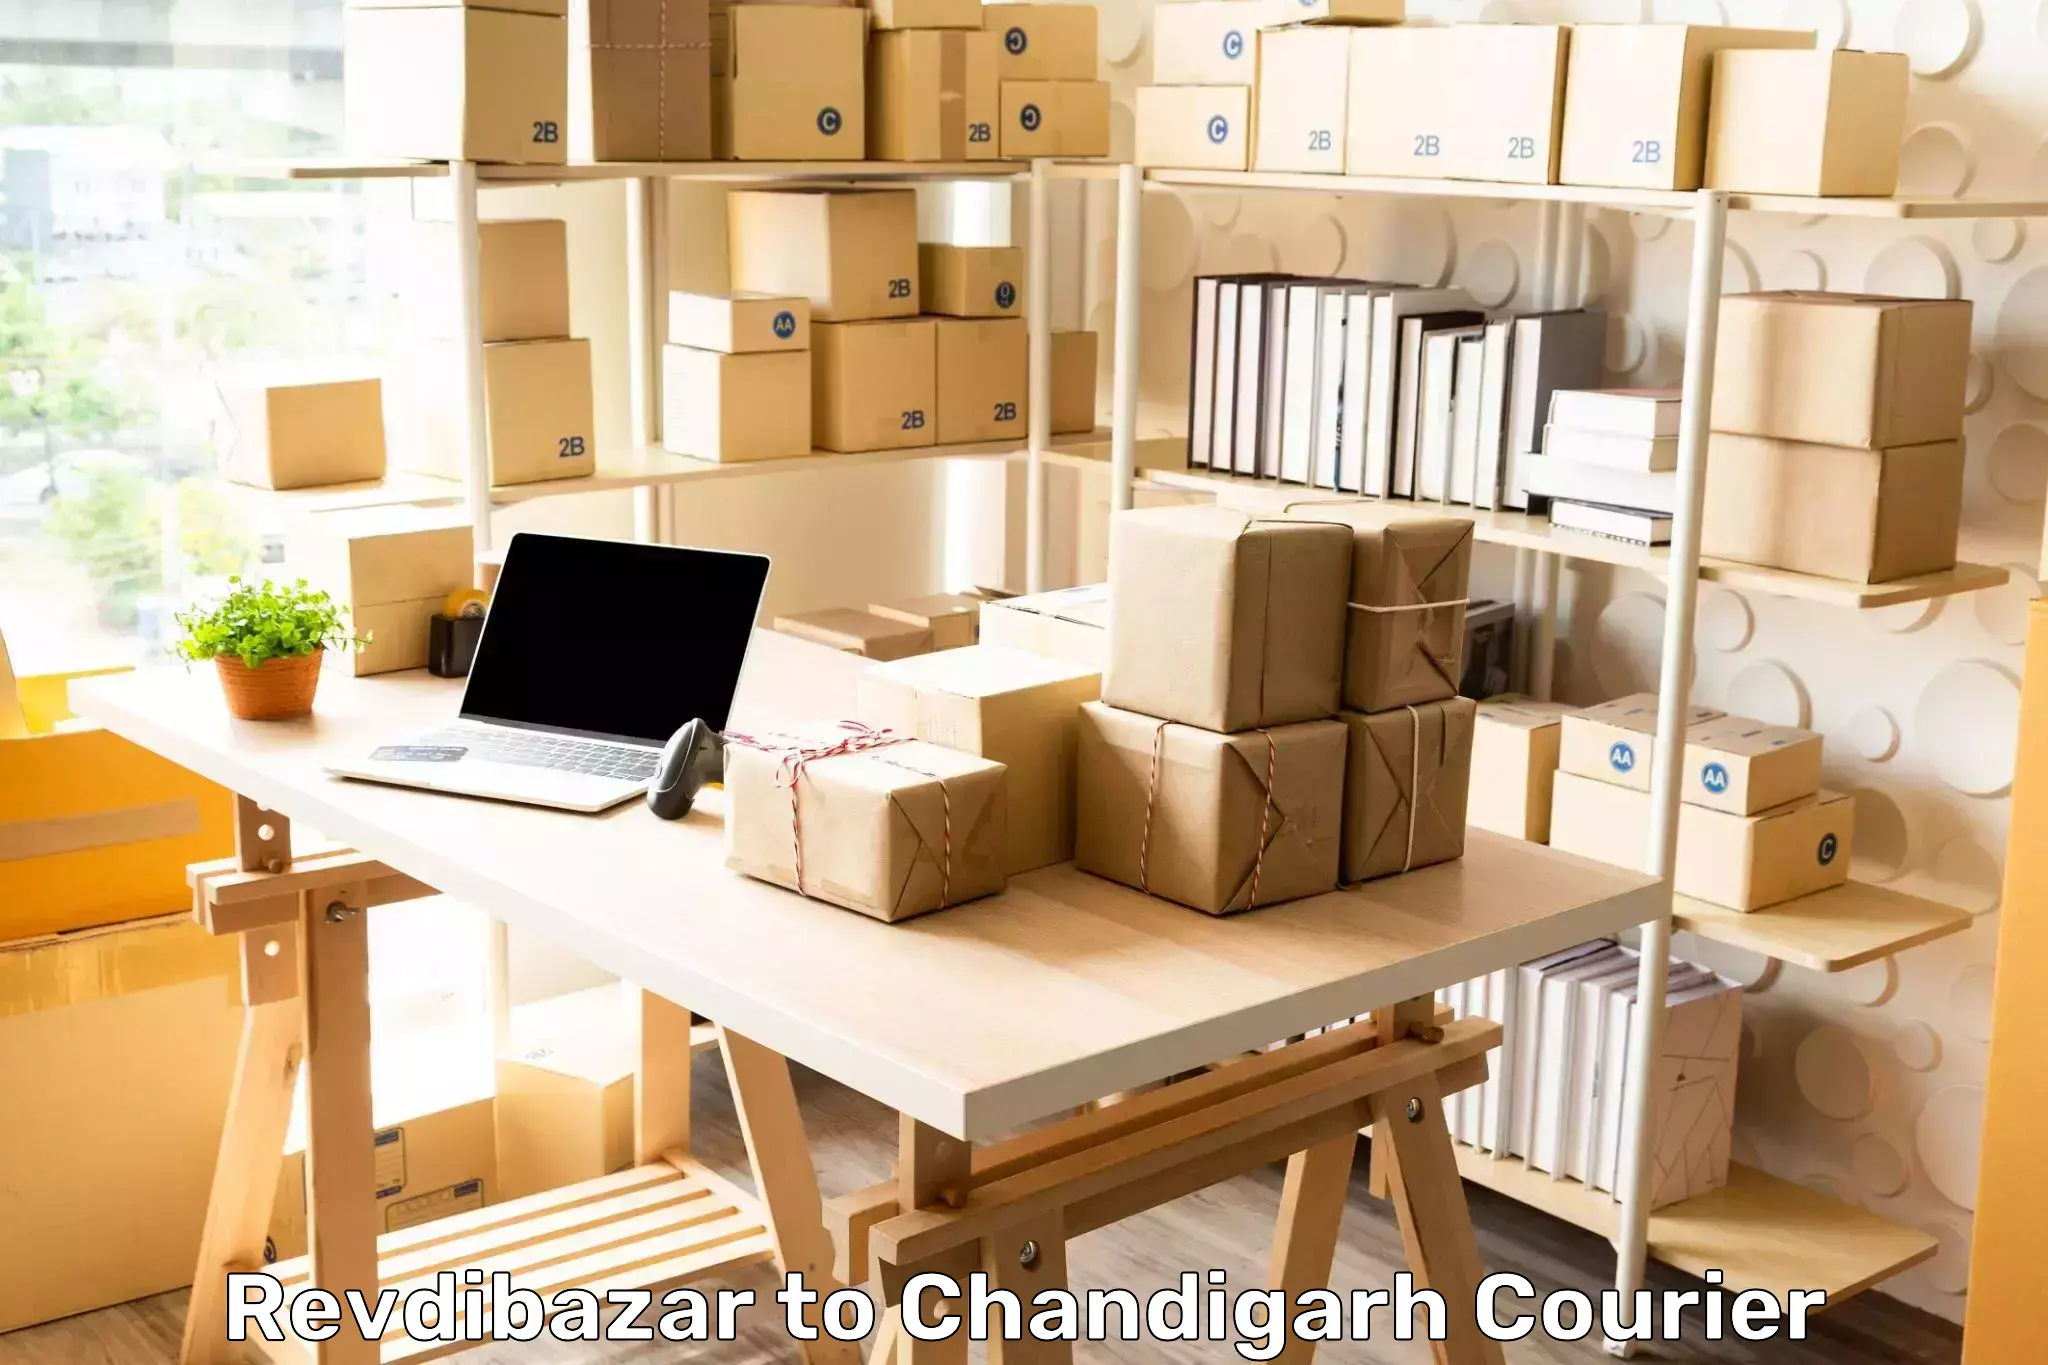 Multi-national courier services Revdibazar to Chandigarh